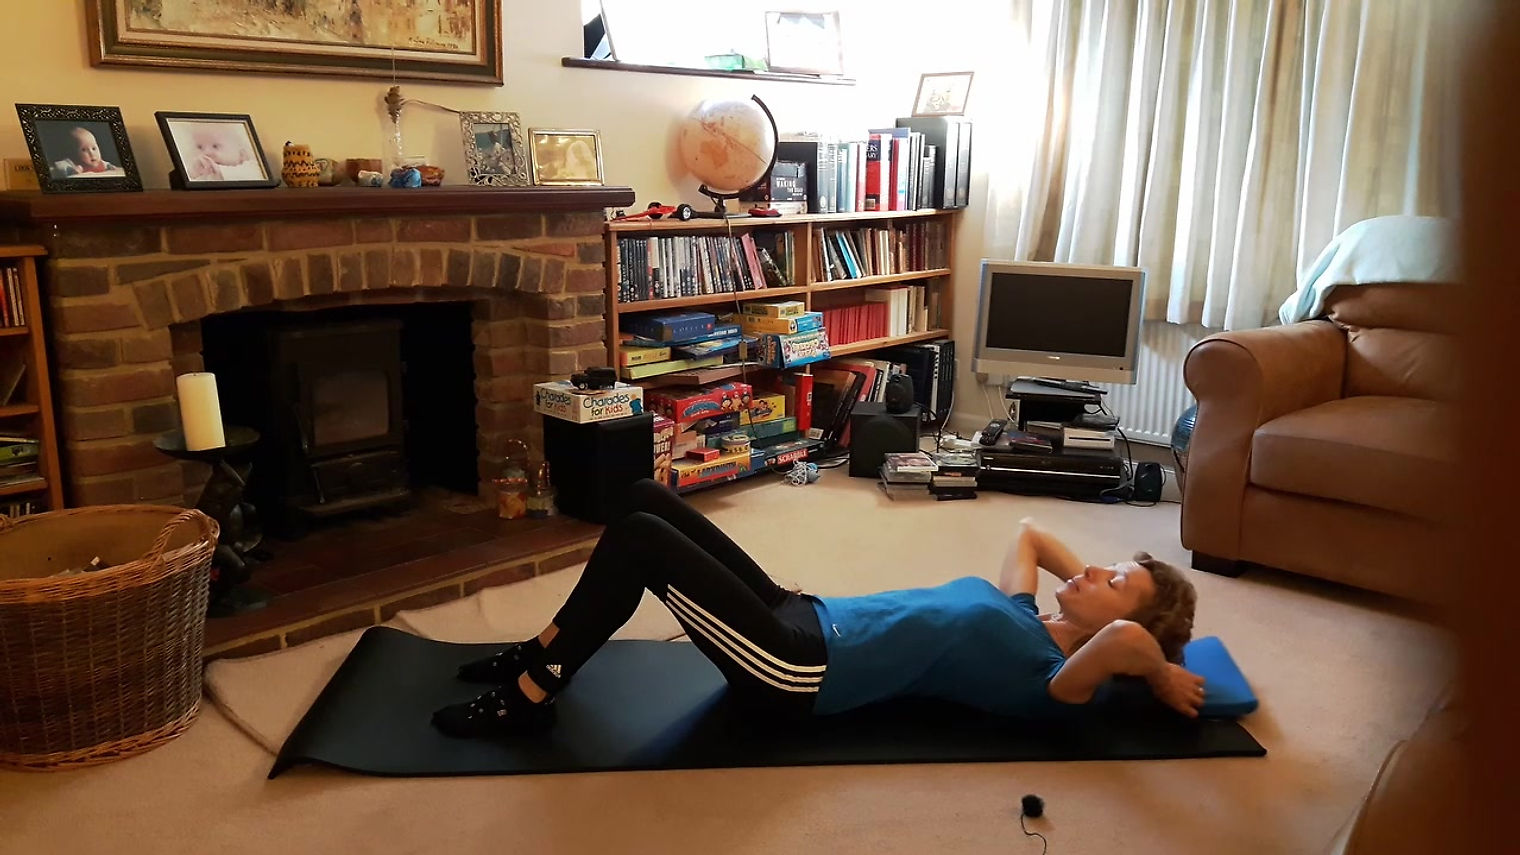 Introduction to Pilates - the five key elements